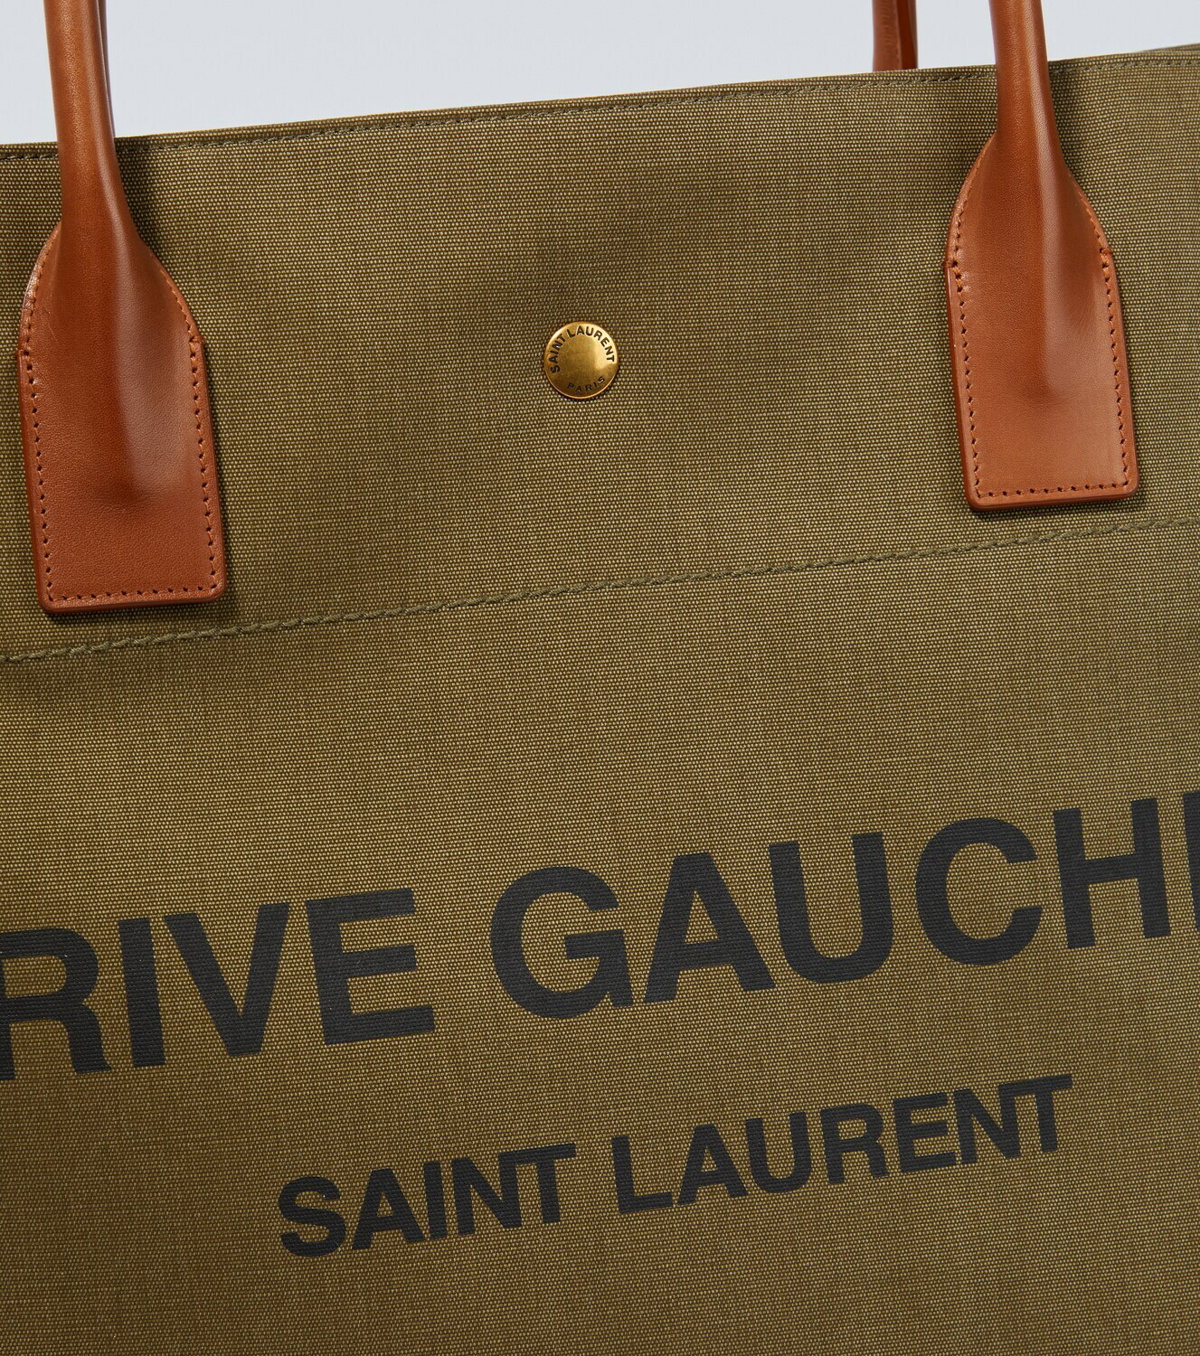 RIVE GAUCHE LARGE TOTE BAG IN CANVAS AND SMOOTH LEATHER